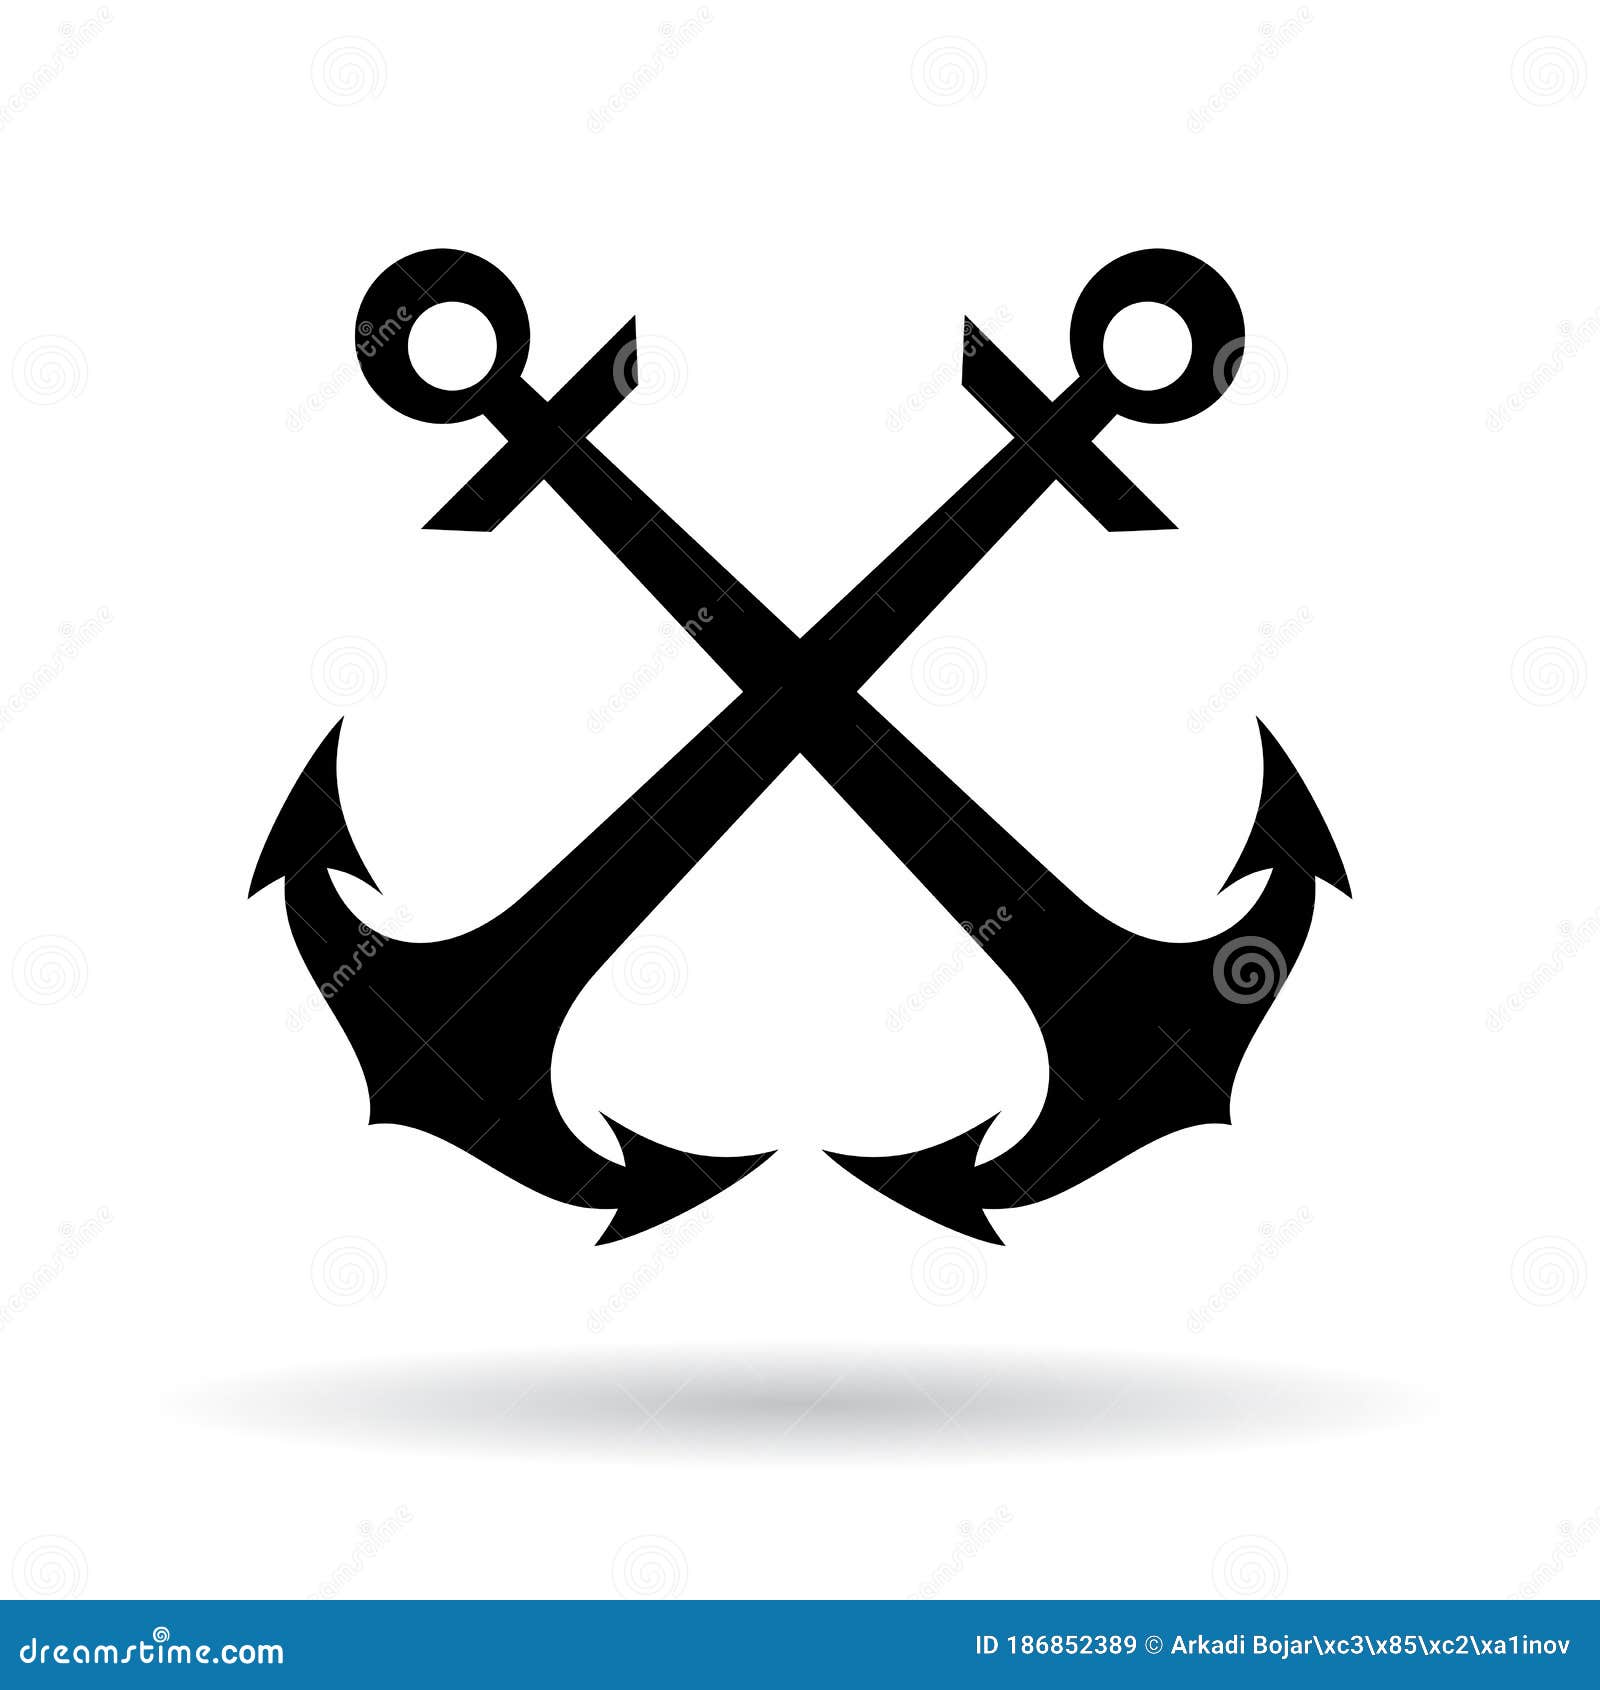 Anchors Images  Free Download on Freepik